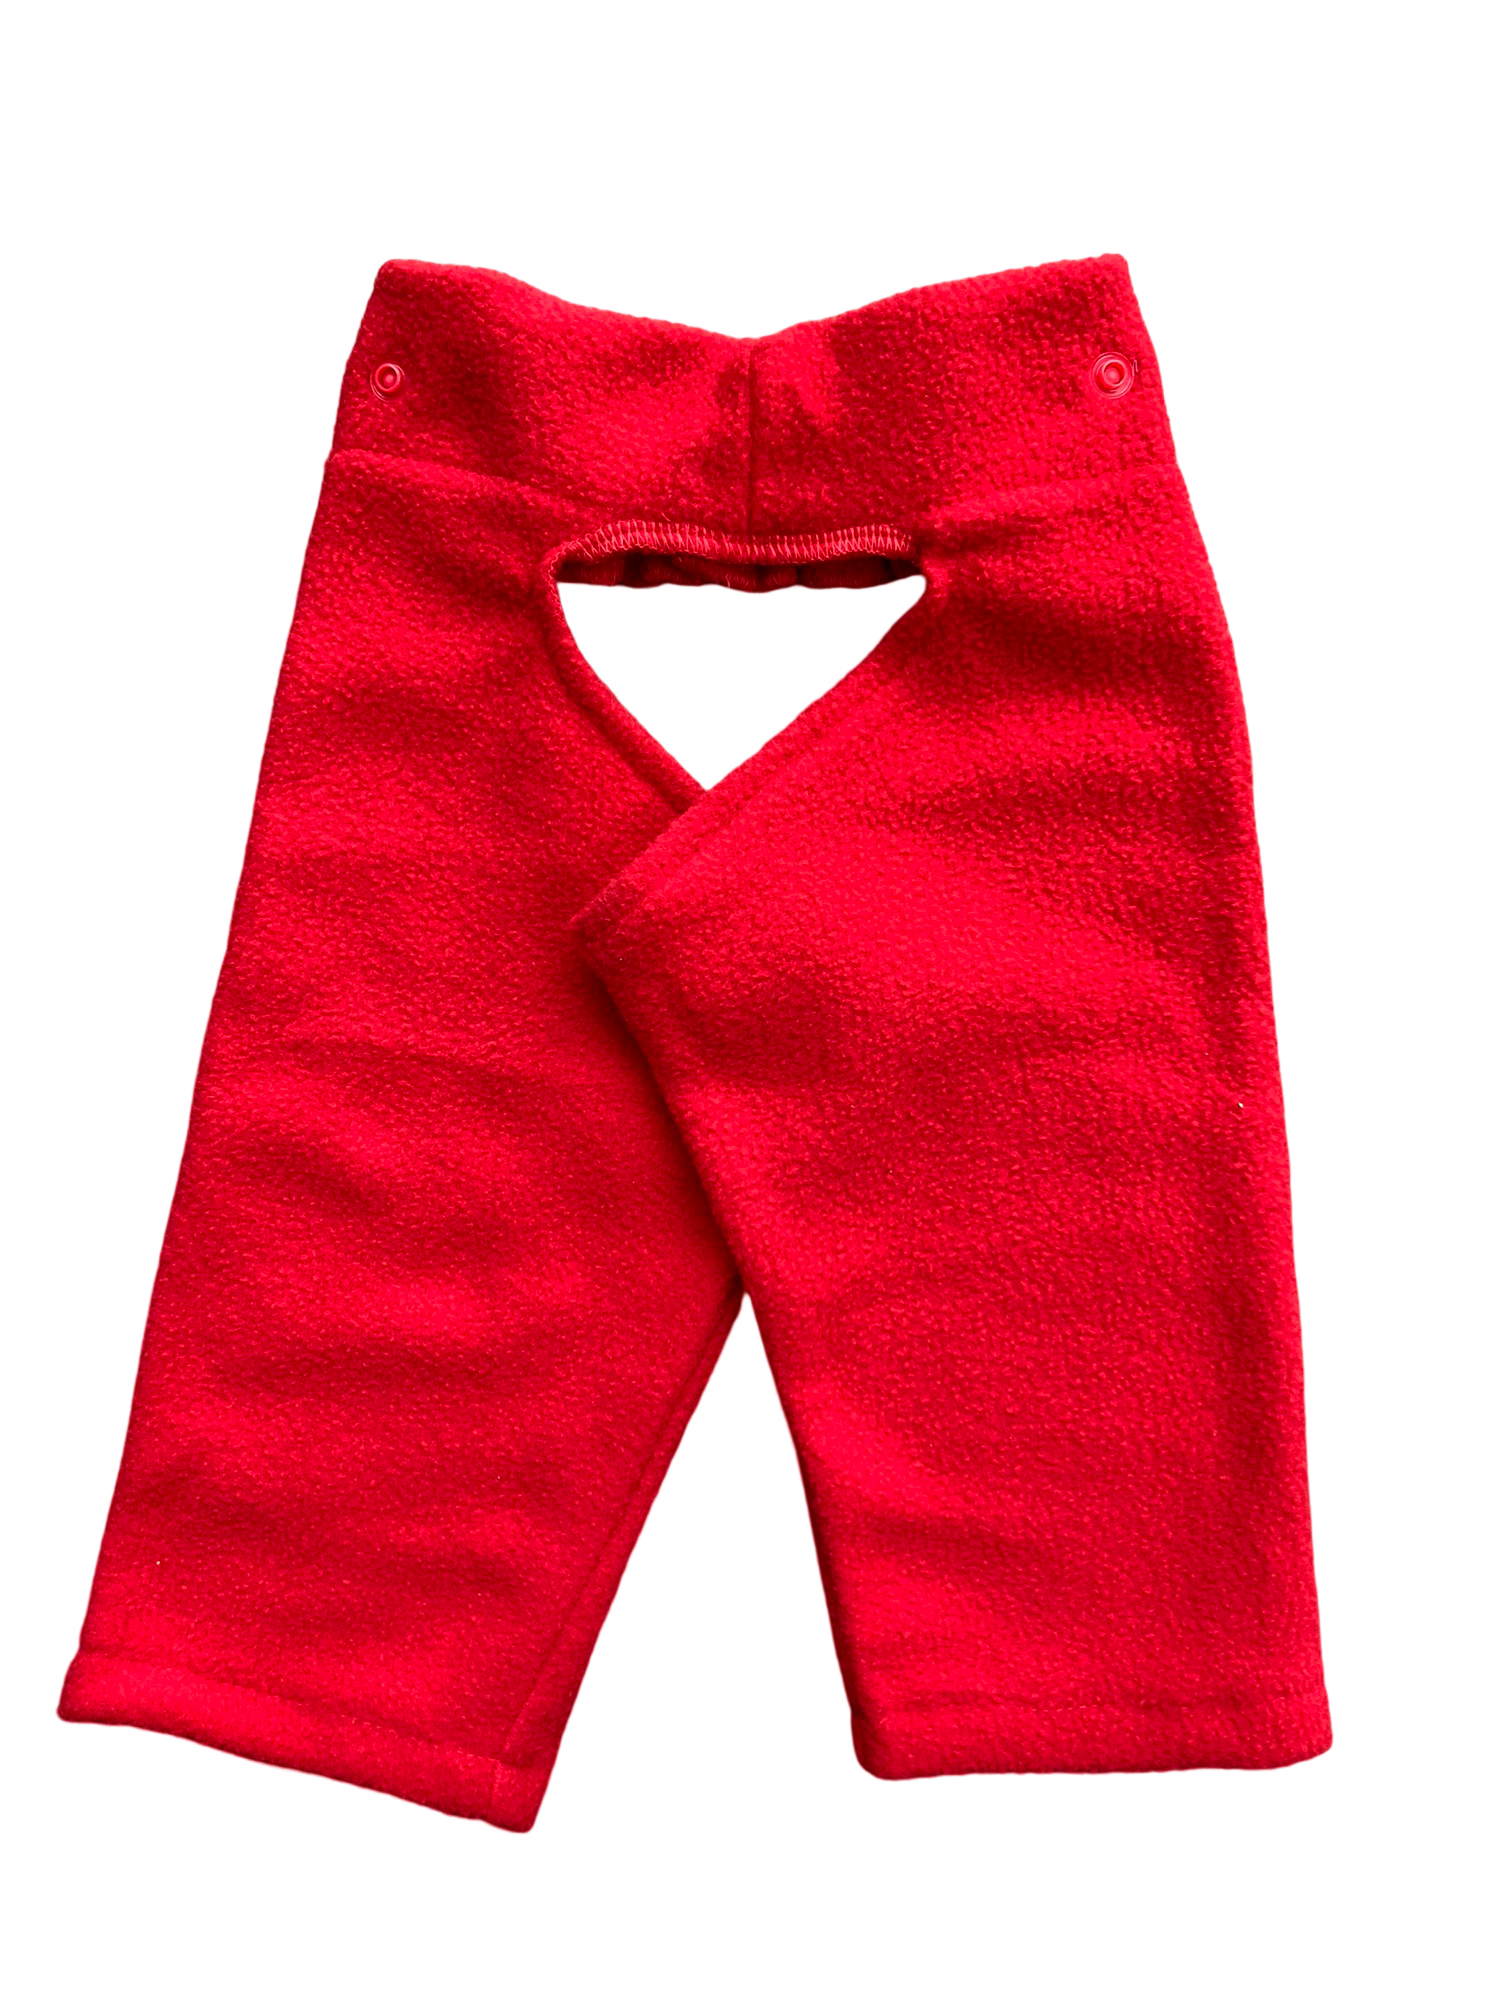 Candy Apple Red Chappy-Nappy Pants